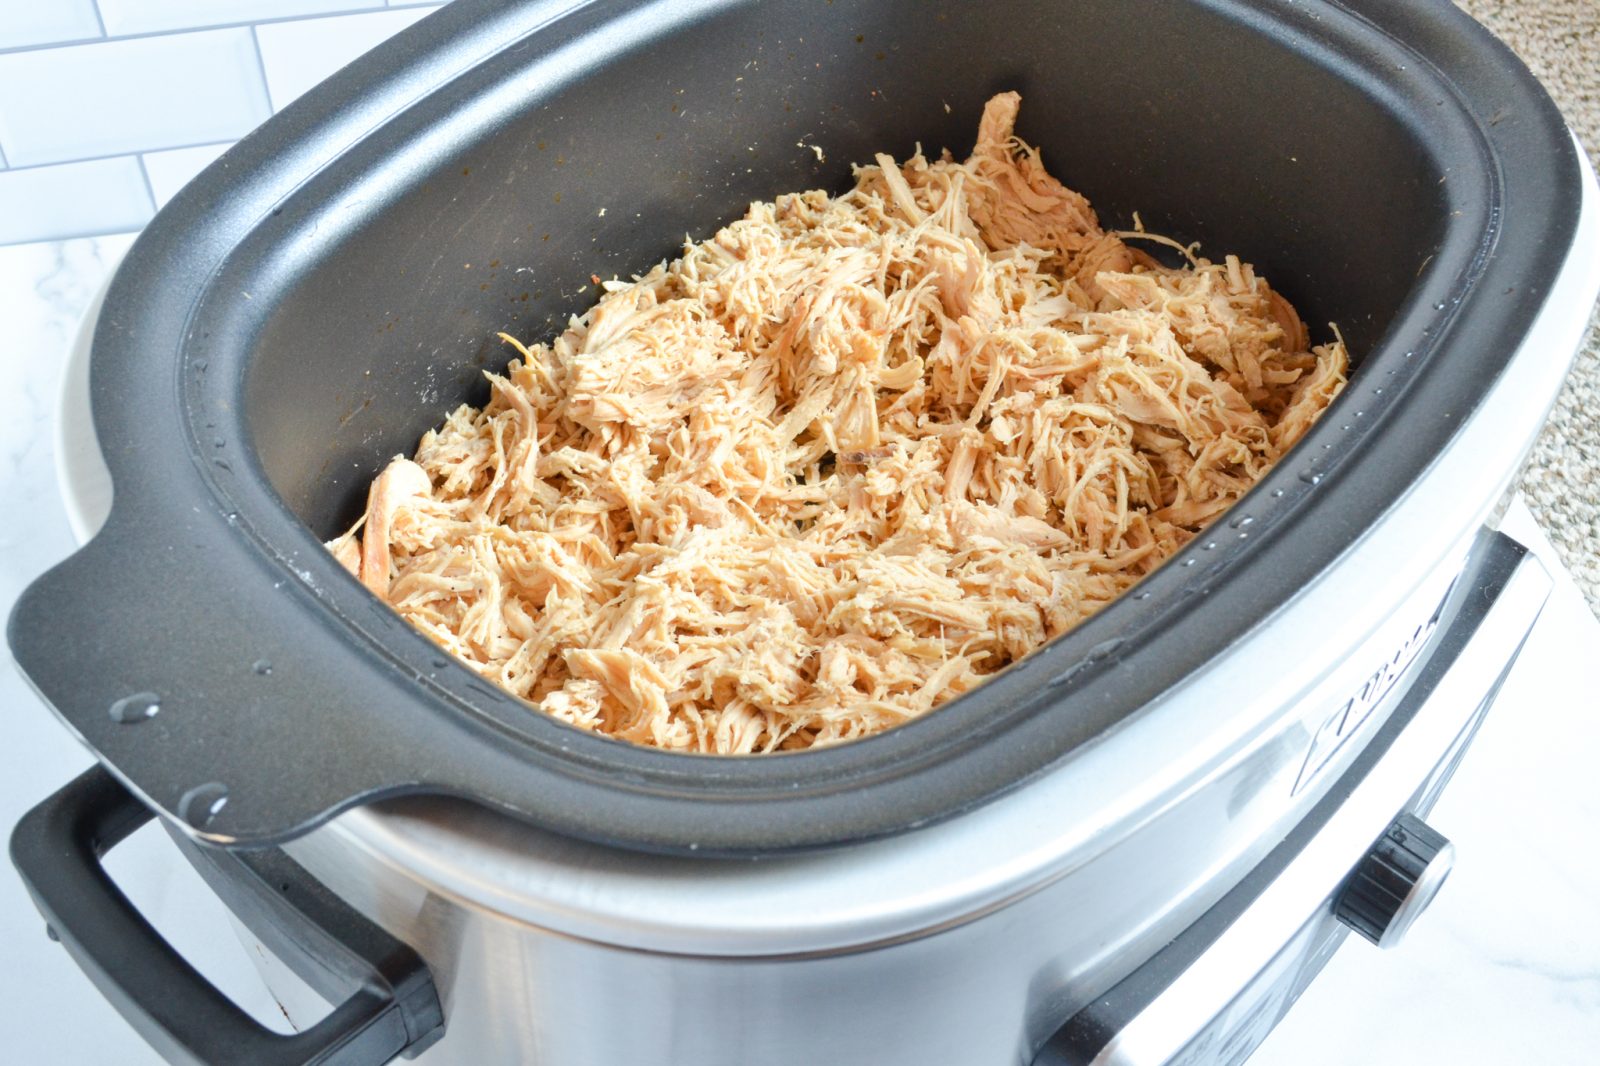 How To Make Pulled Chicken In A Slow Cooker